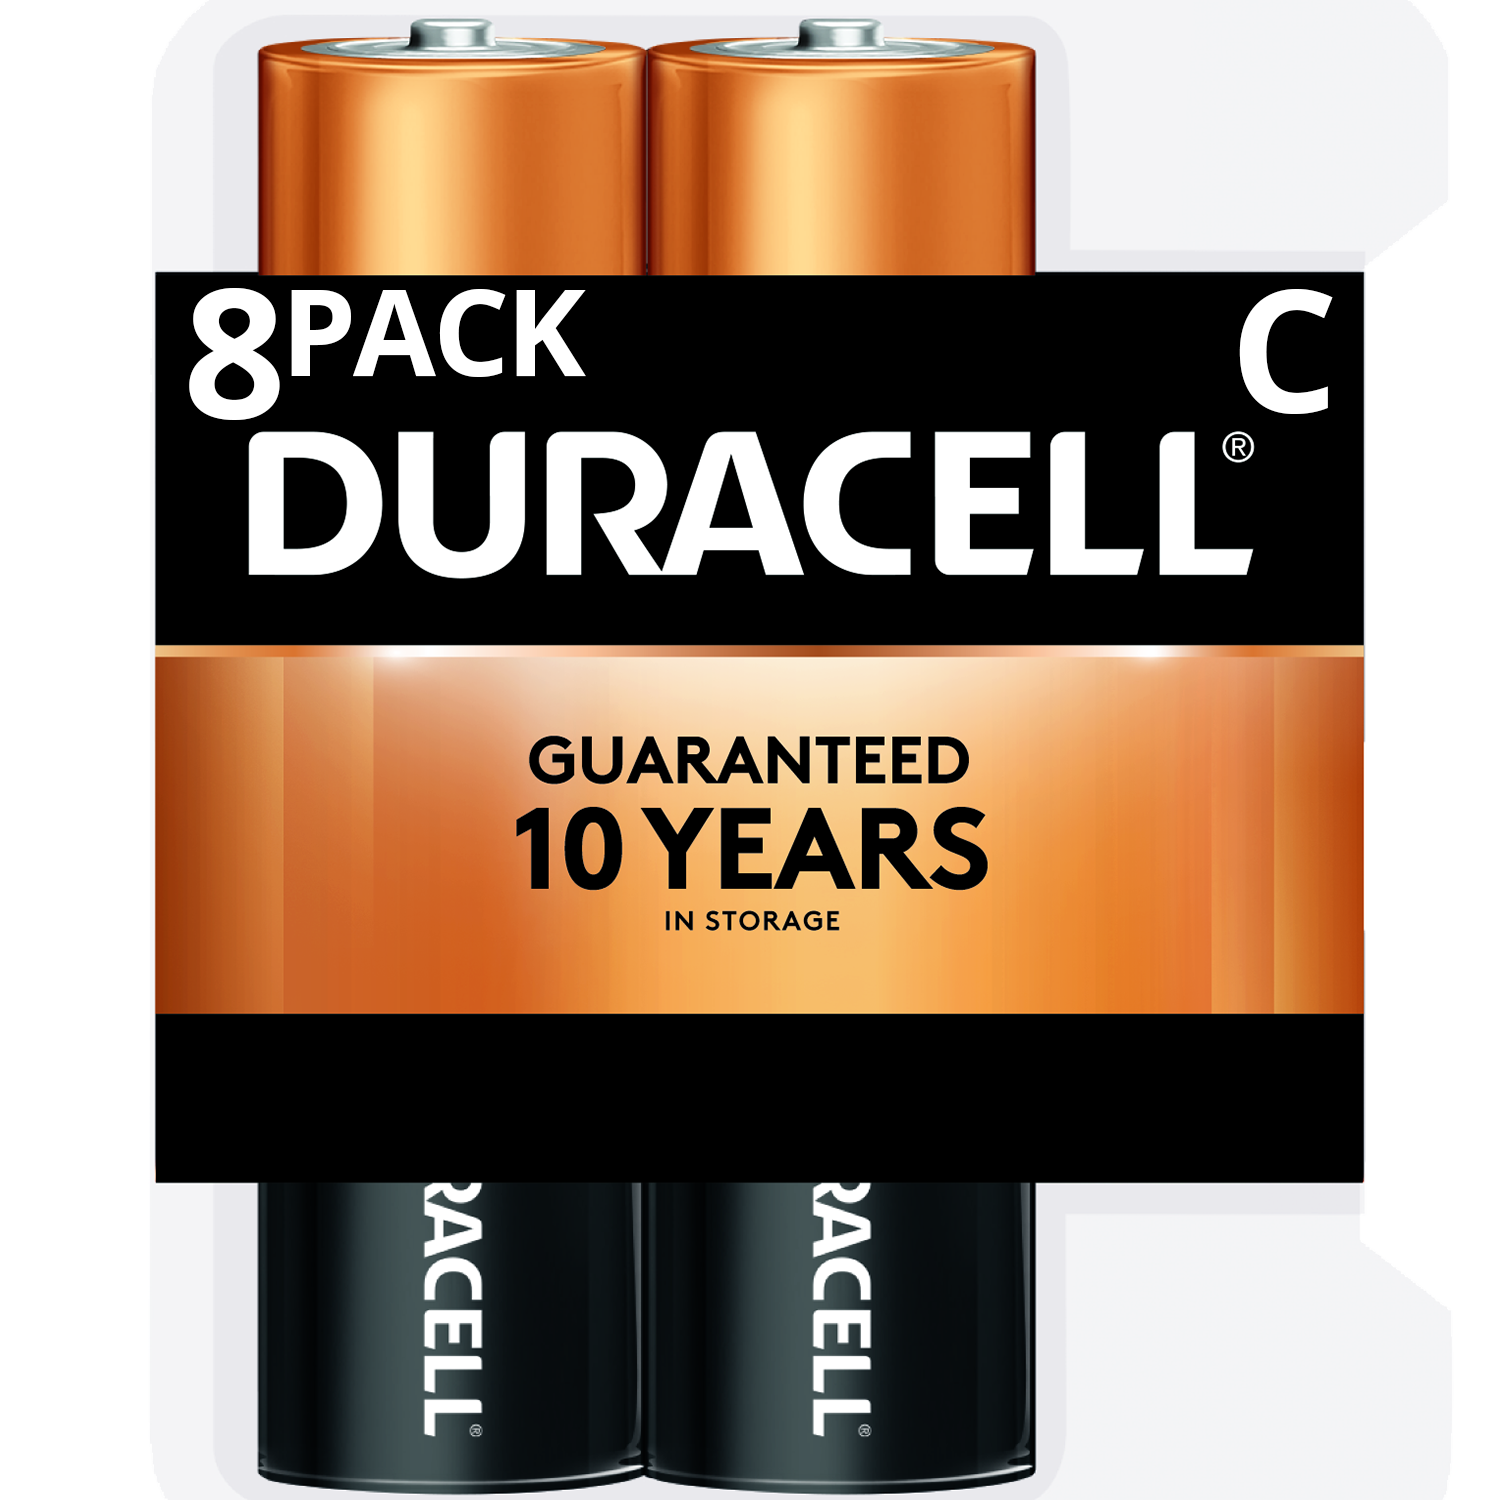 Duracell Coppertop C Battery, Long Lasting C Batteries, 8 Pack - image 1 of 9